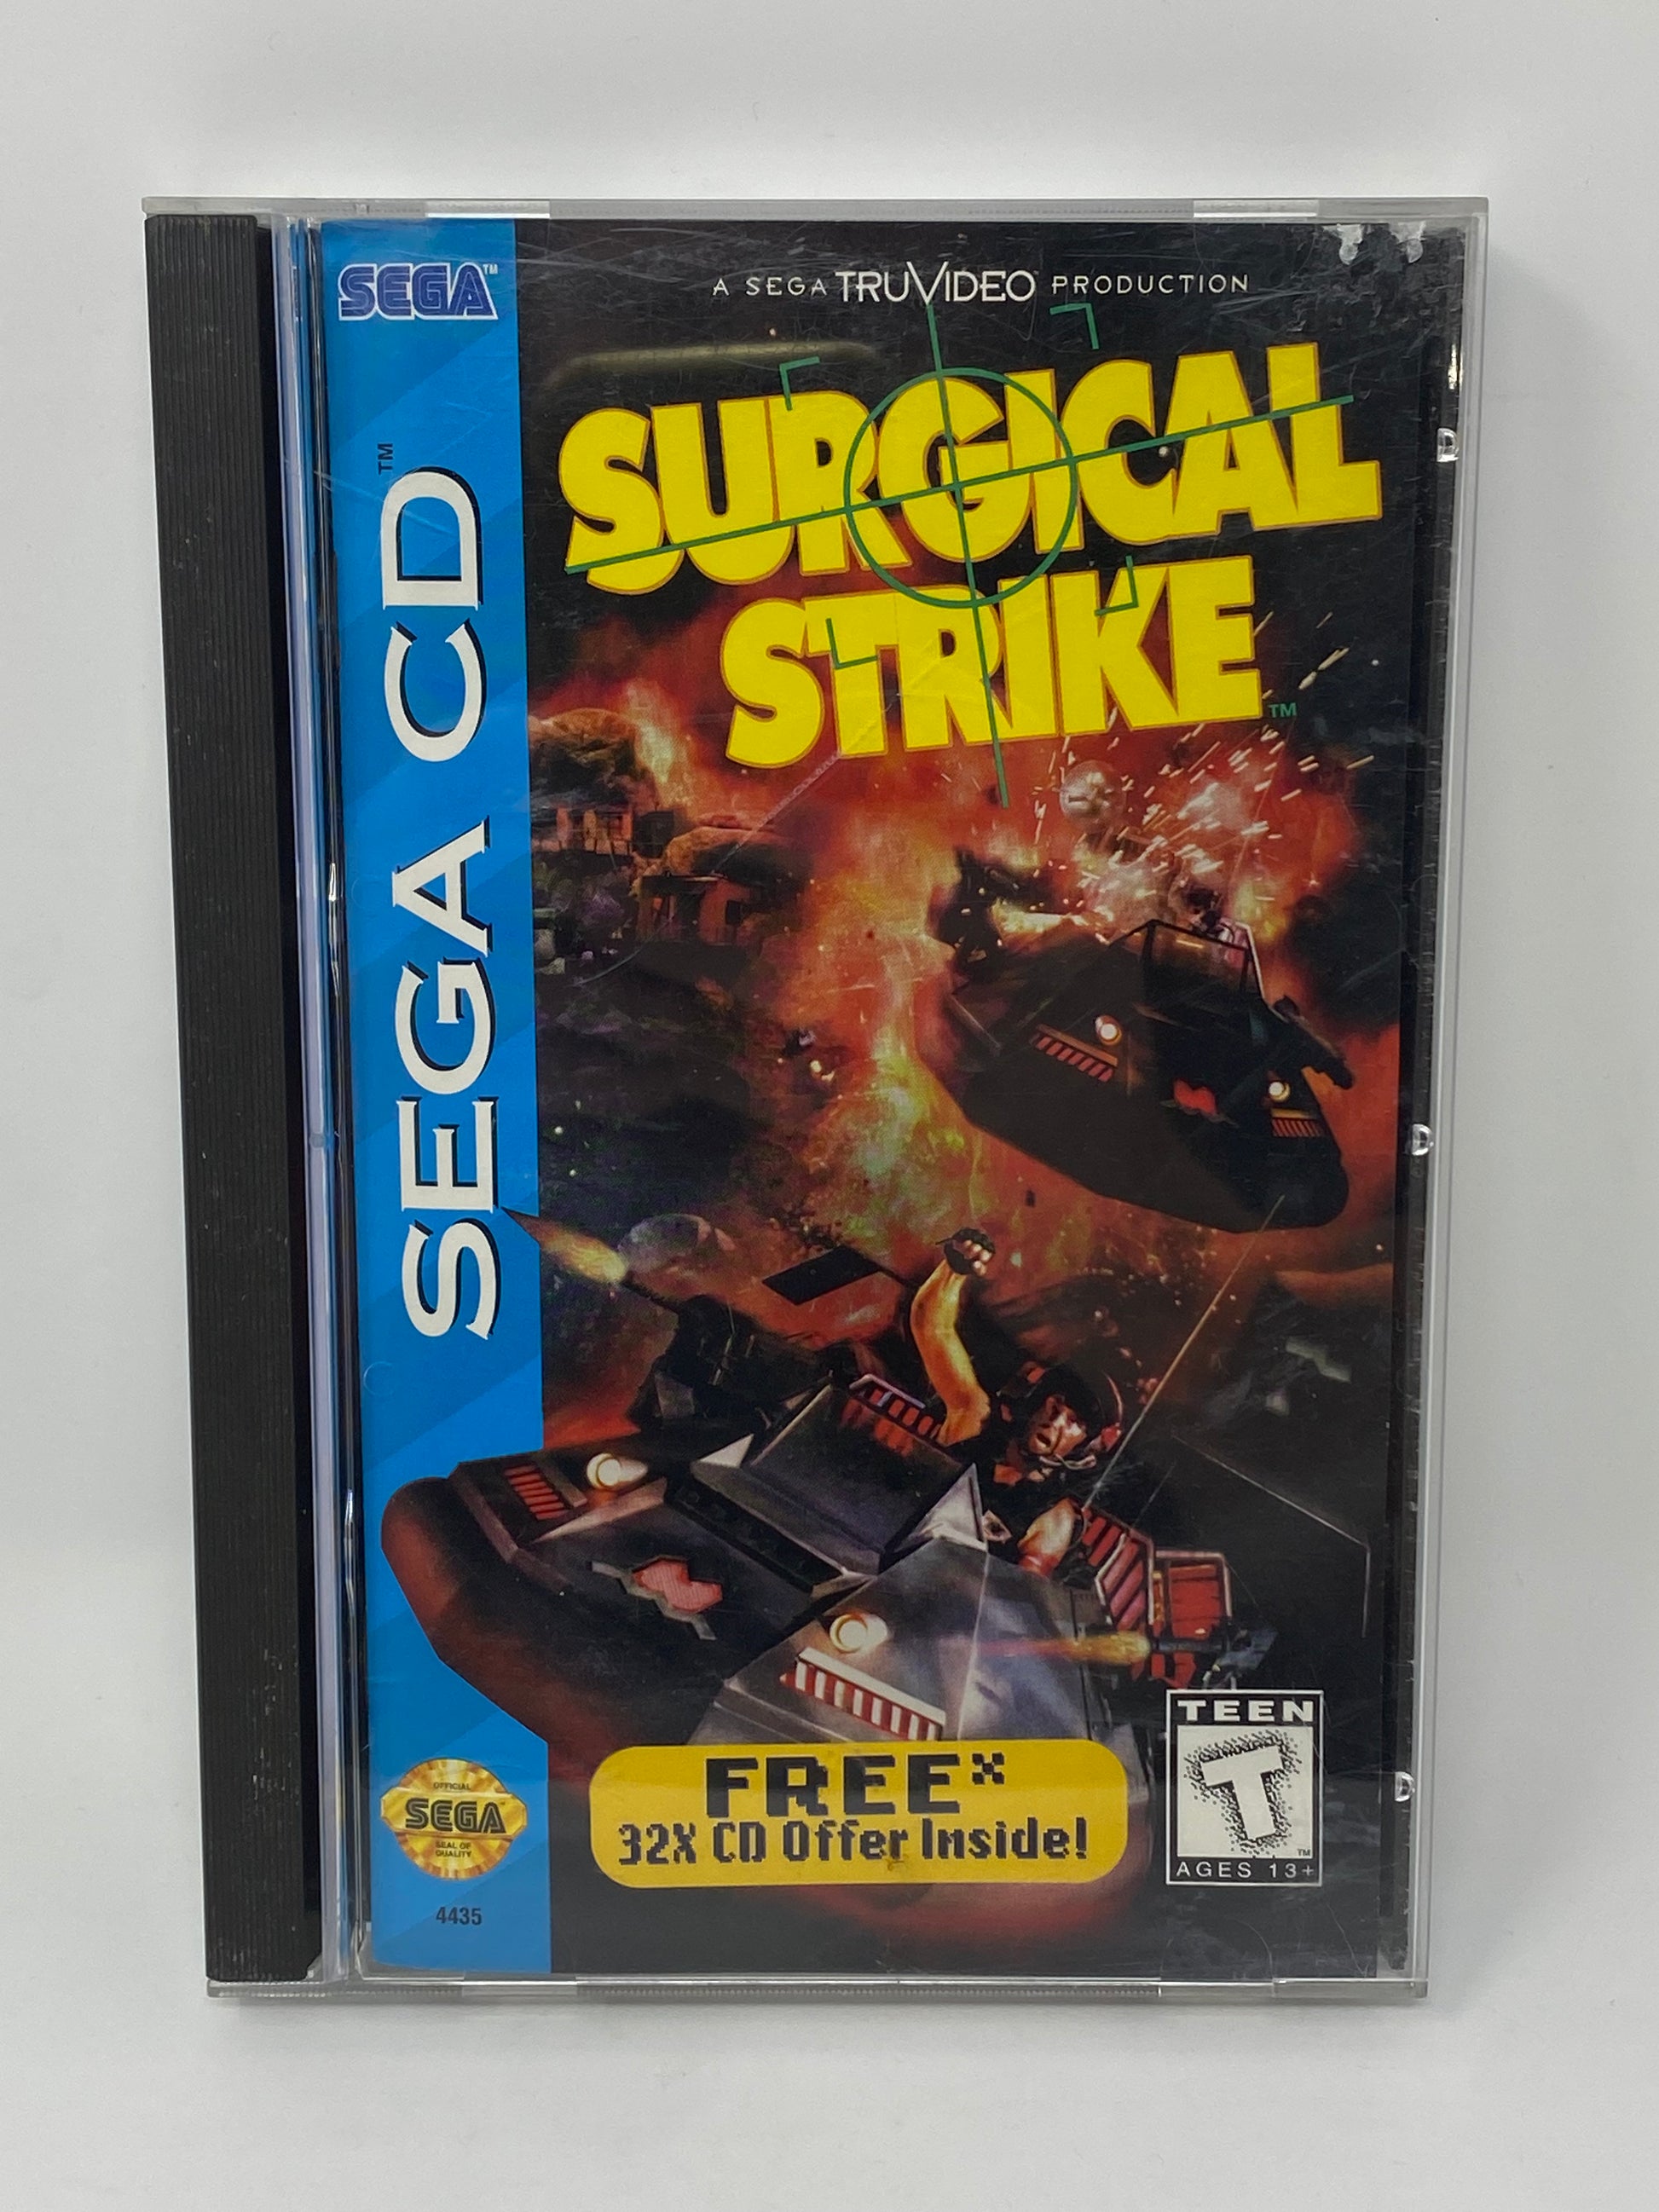 Sega CD - Surgical Strike - Complete – The Generation X of America